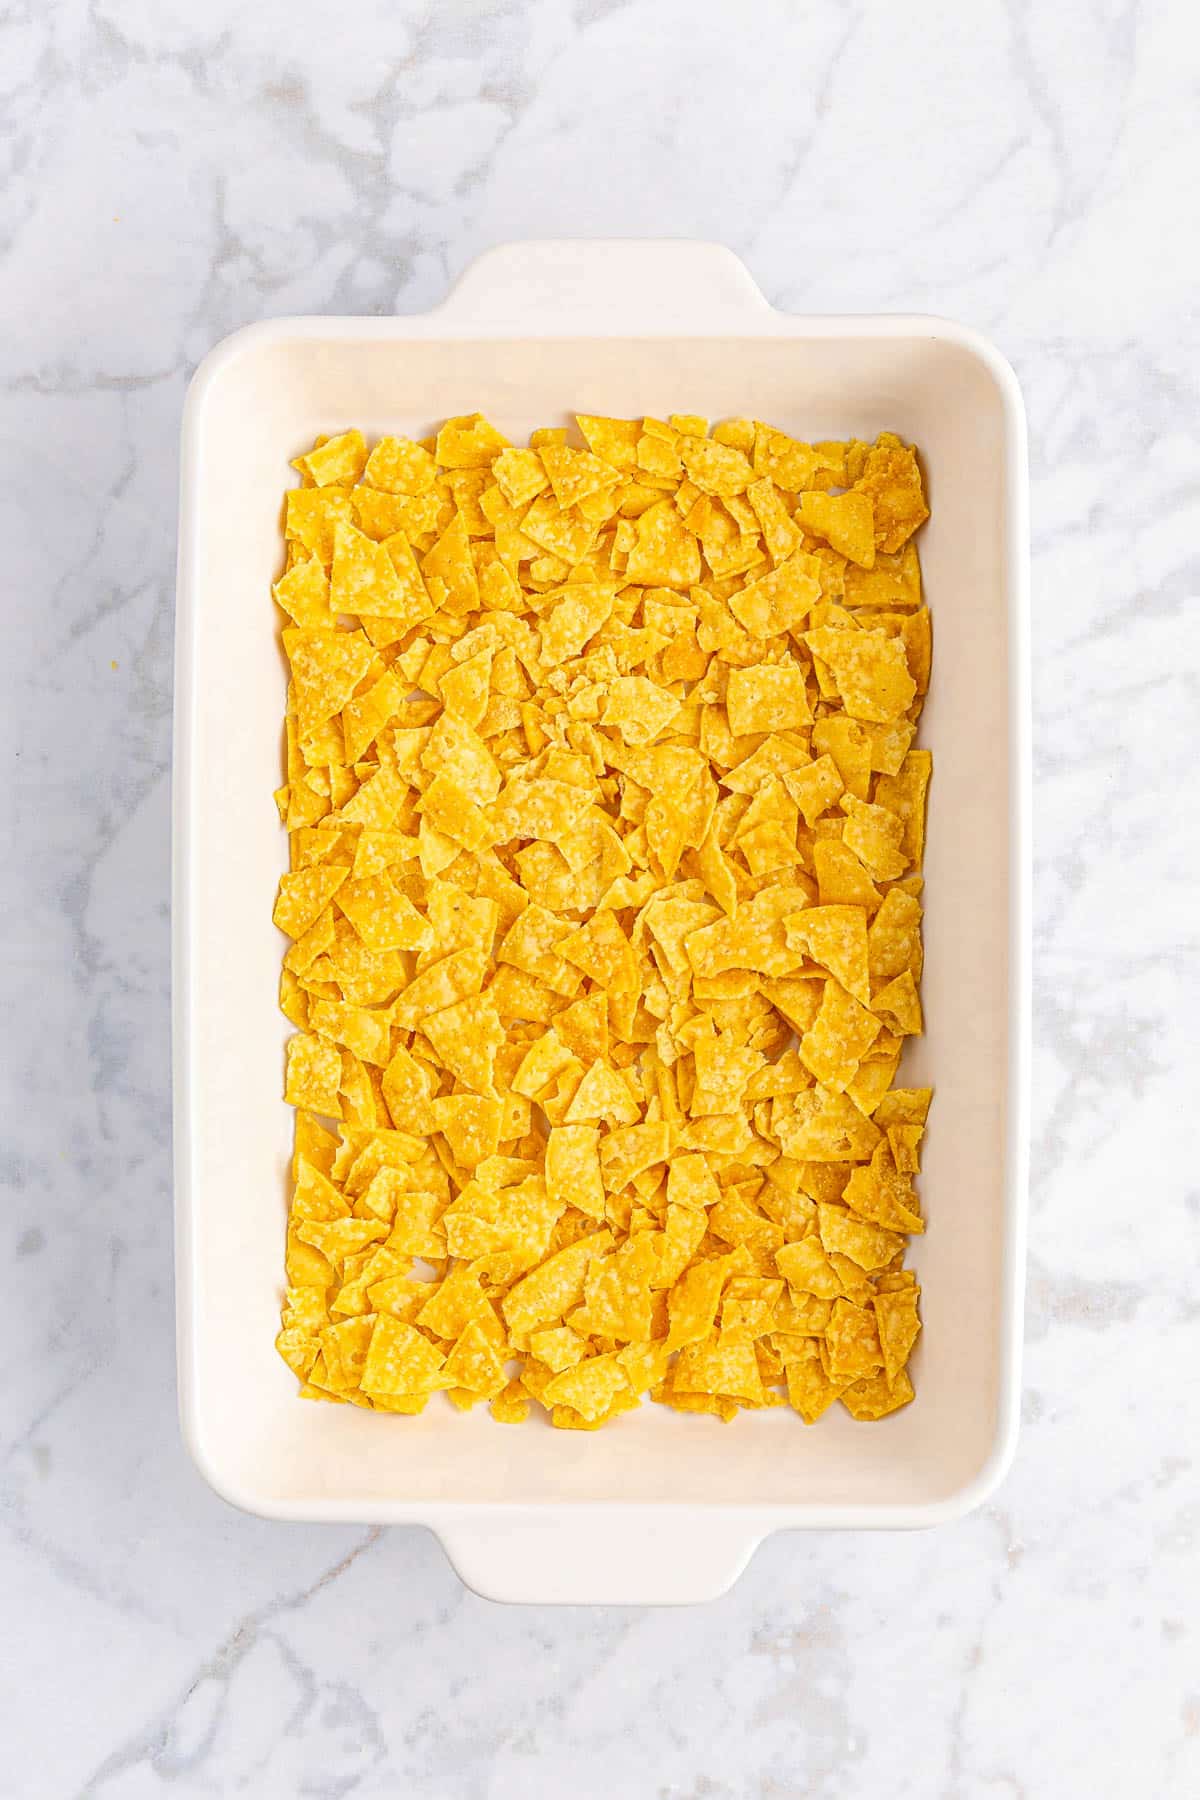 Crushed tortilla chips in white casserole dish.